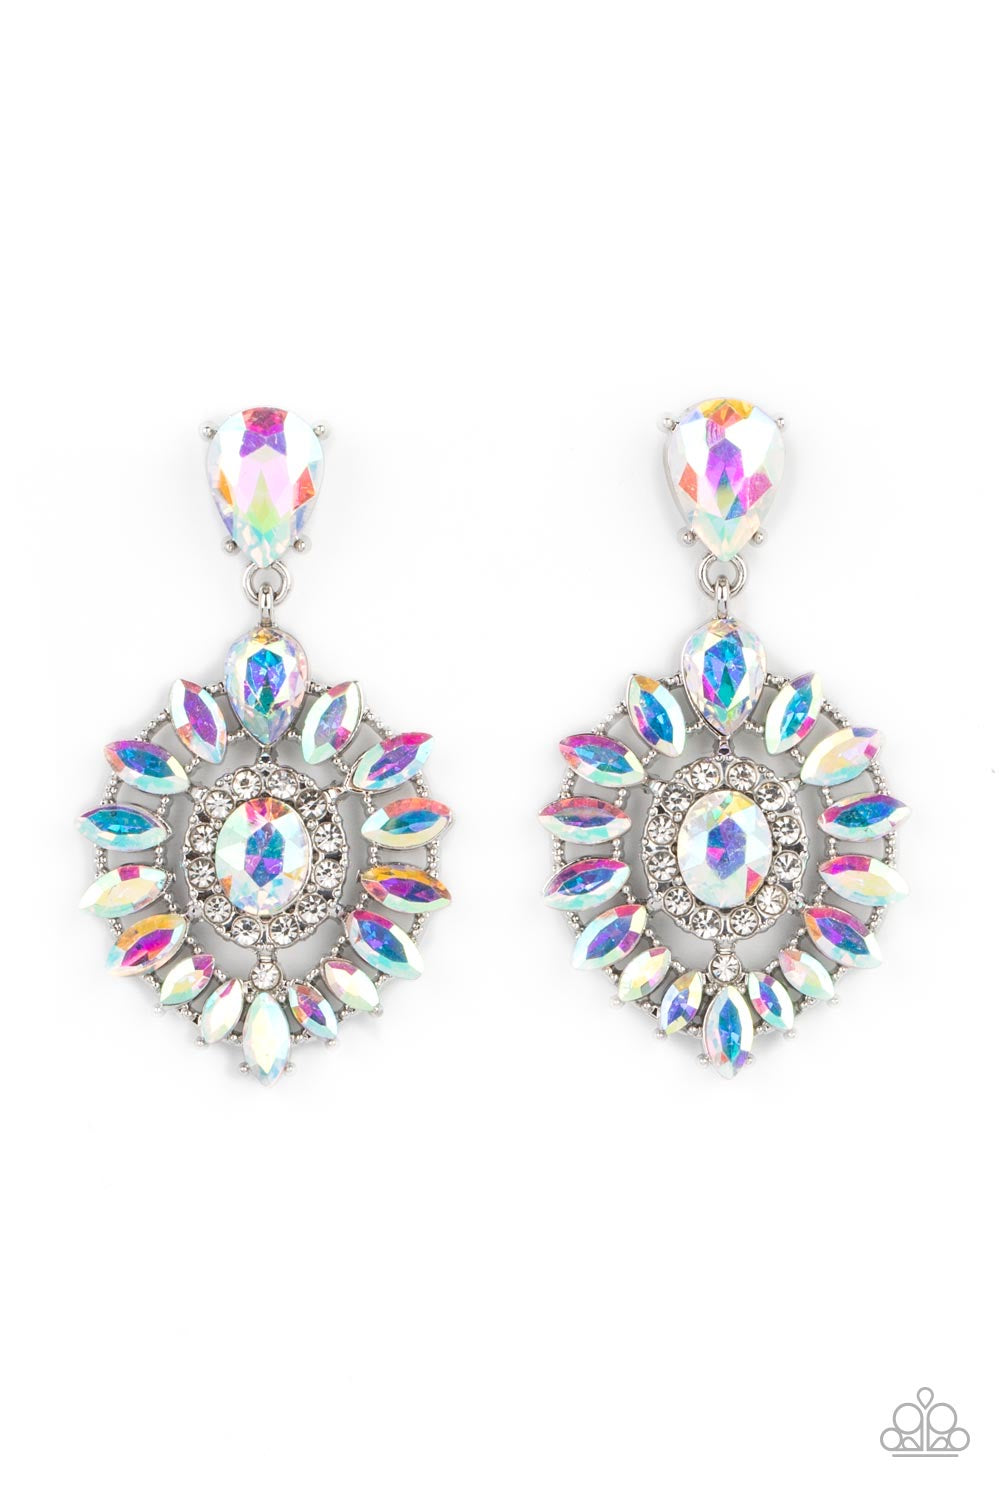 Paparazzi My Good LUXE Charm - Multi Earrings - A Finishing Touch Jewelry